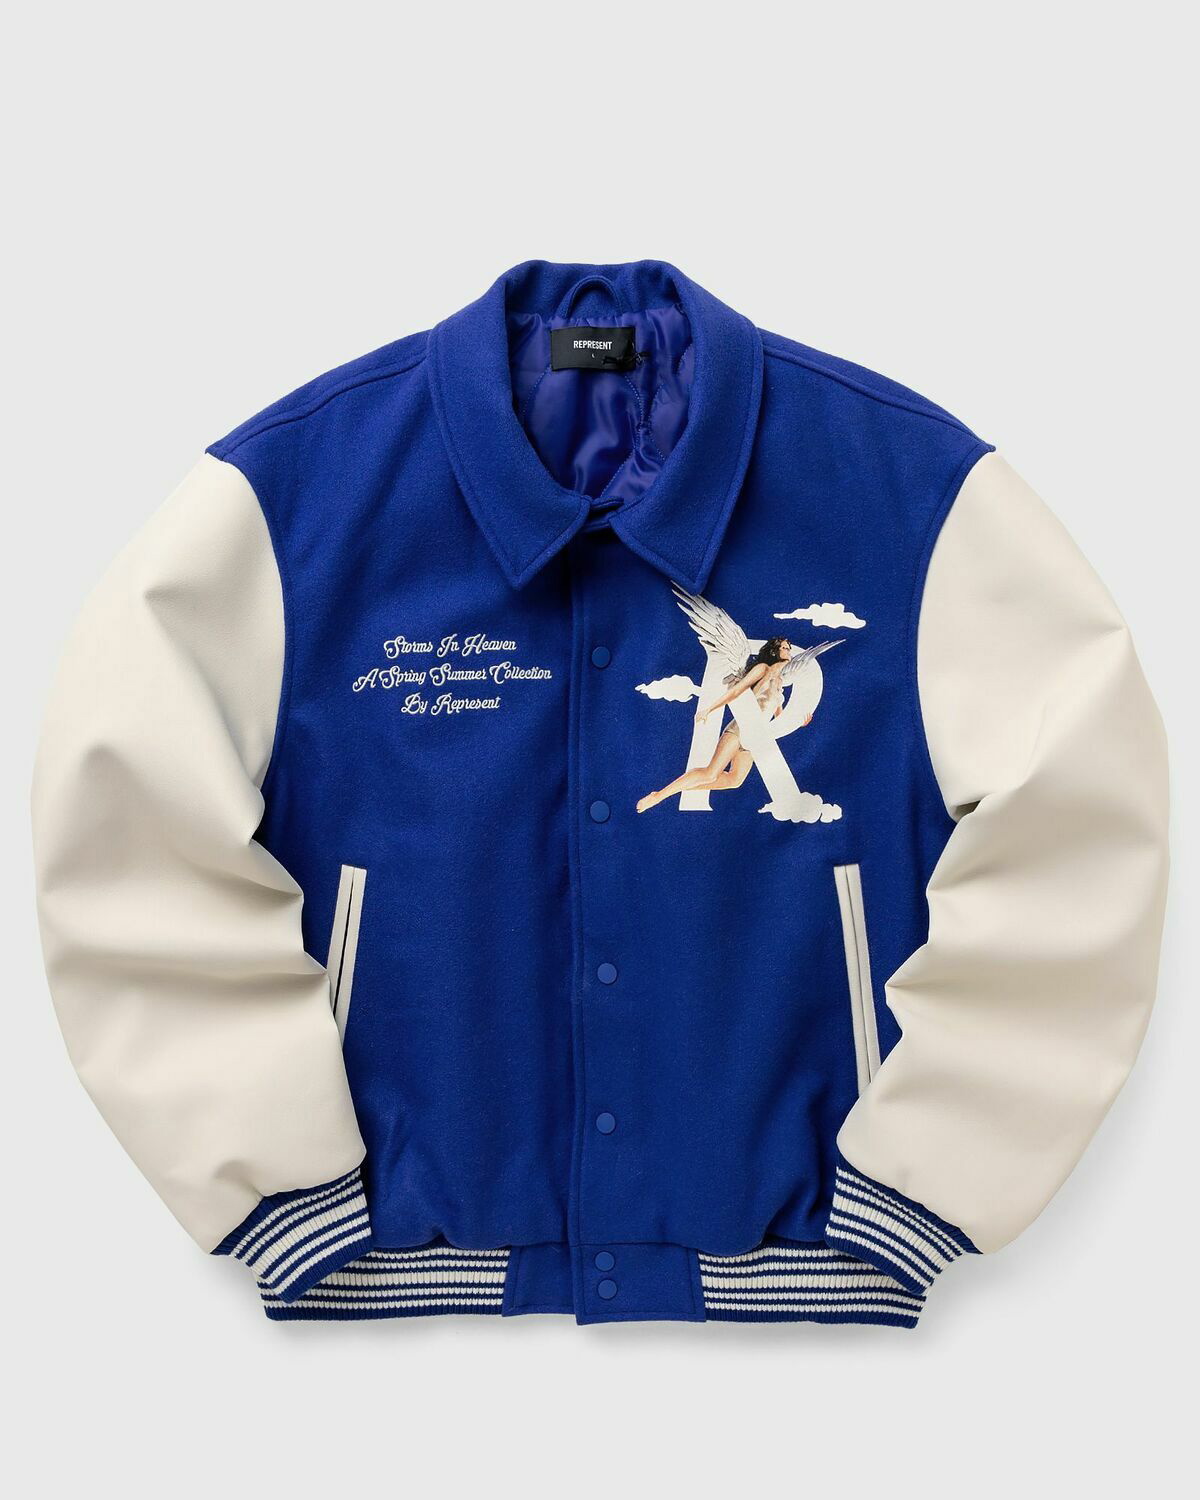 Represent Storms In Heaven Wool-blend Varsity Jacket in Blue for